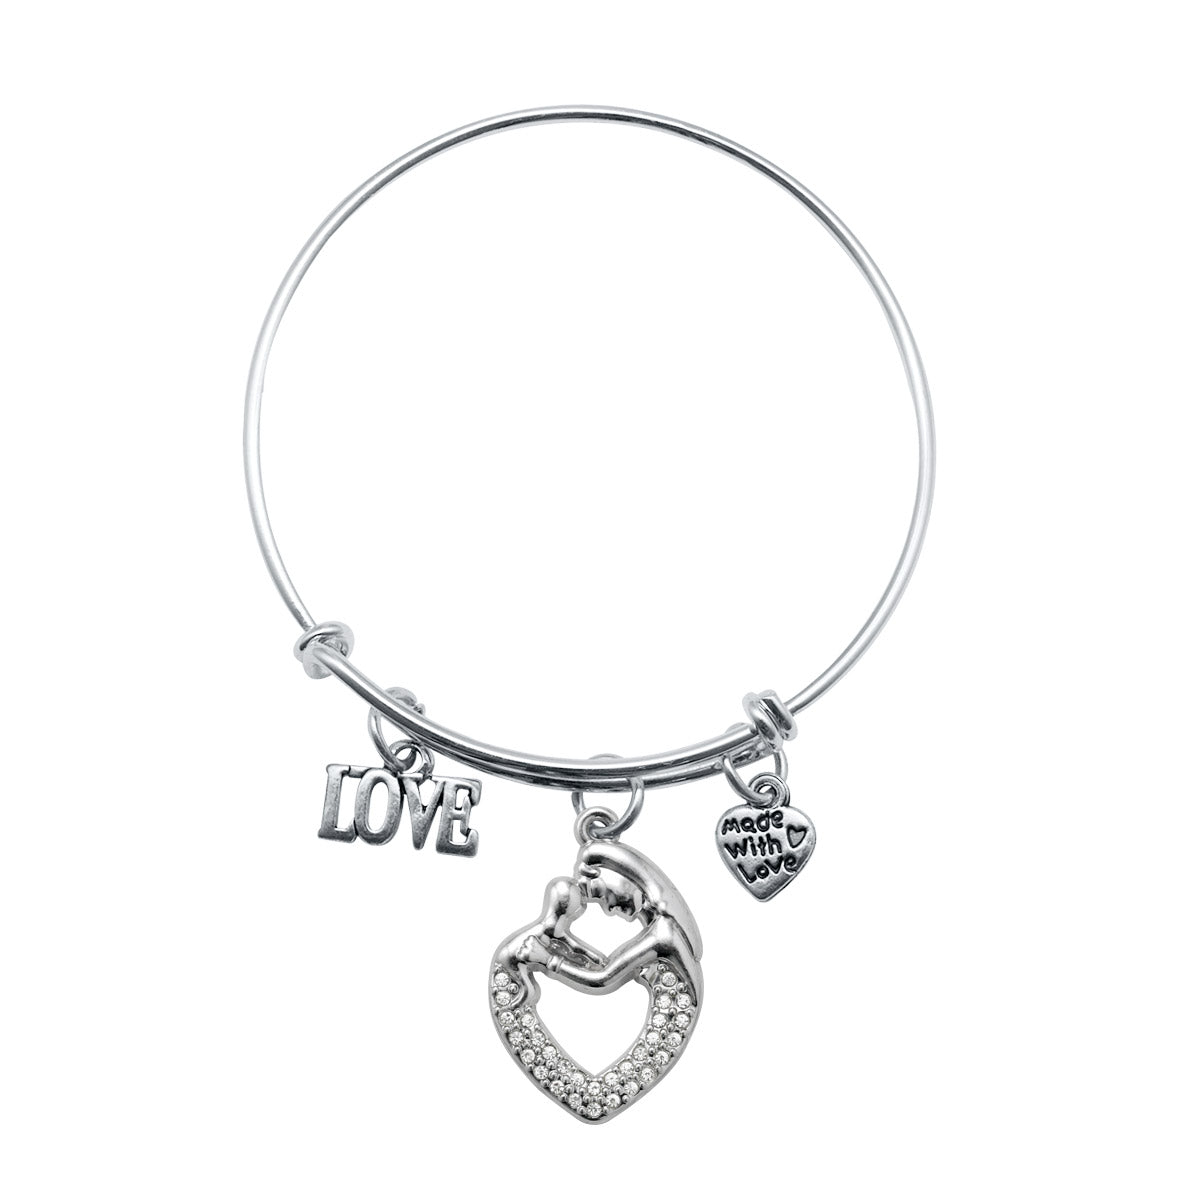 Silver Love Mother and Child Charm Wire Bangle Bracelet